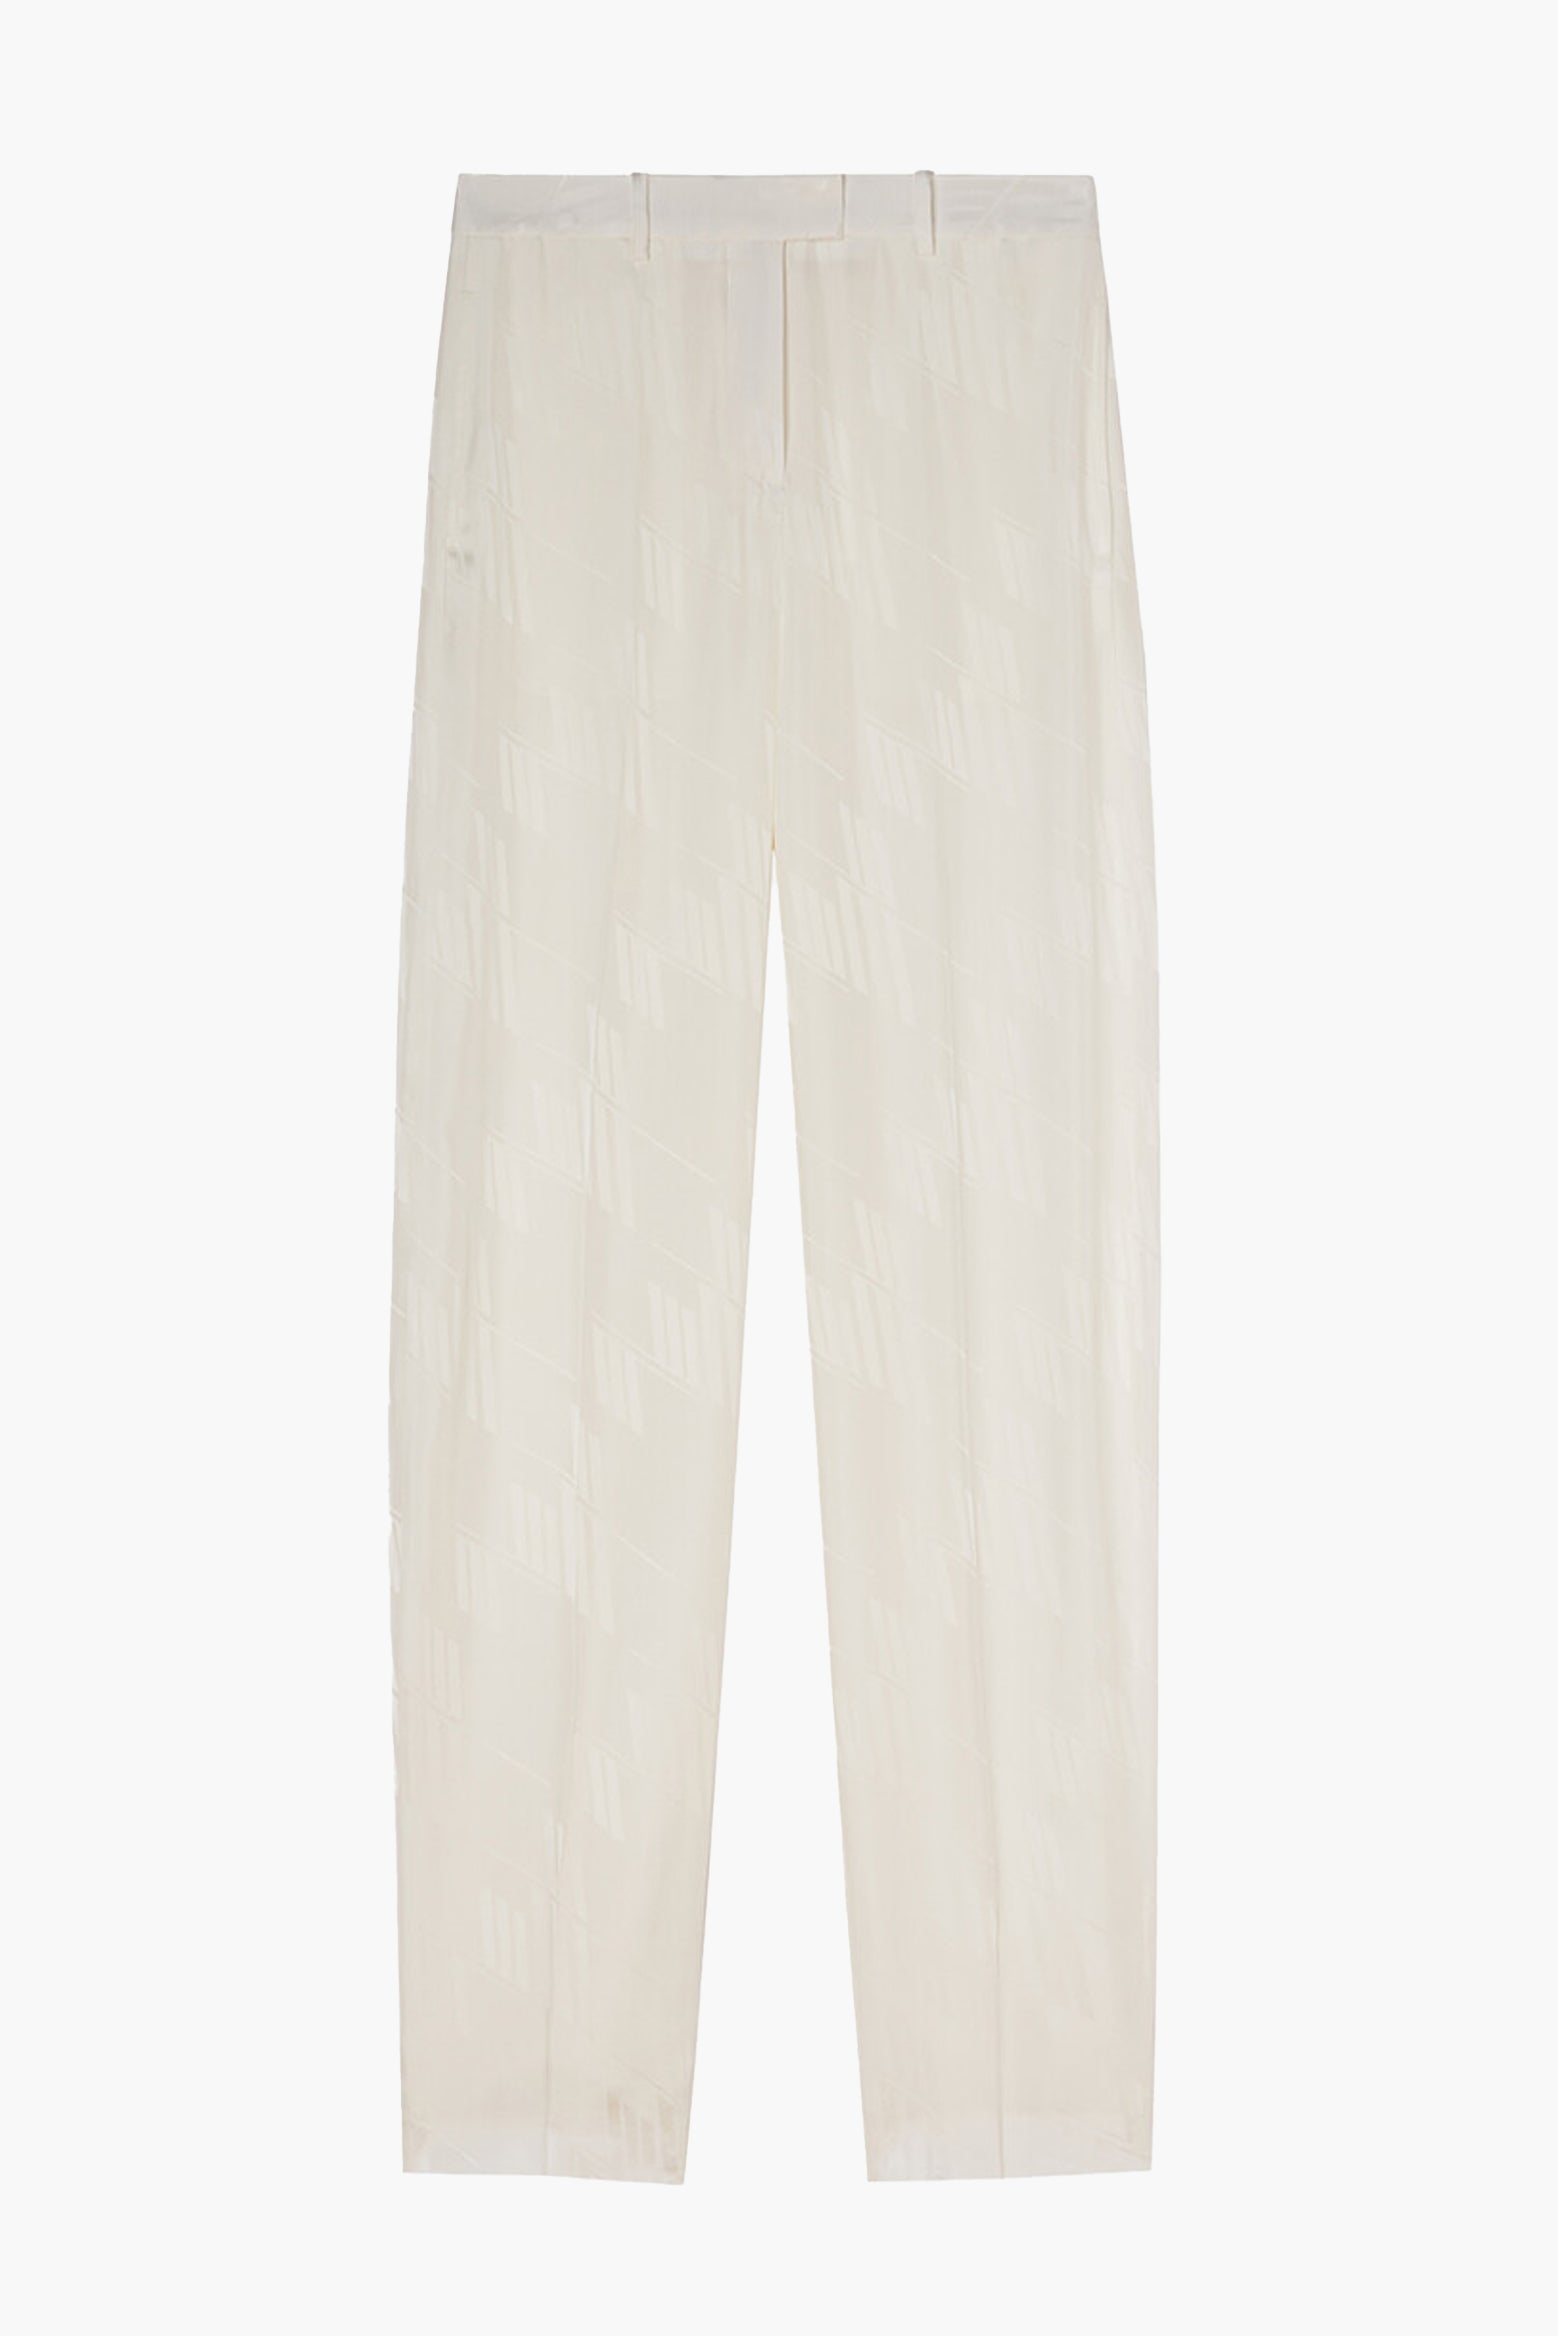 The Attico Jagger Long Pants in Milk available at The New Trend Australia.